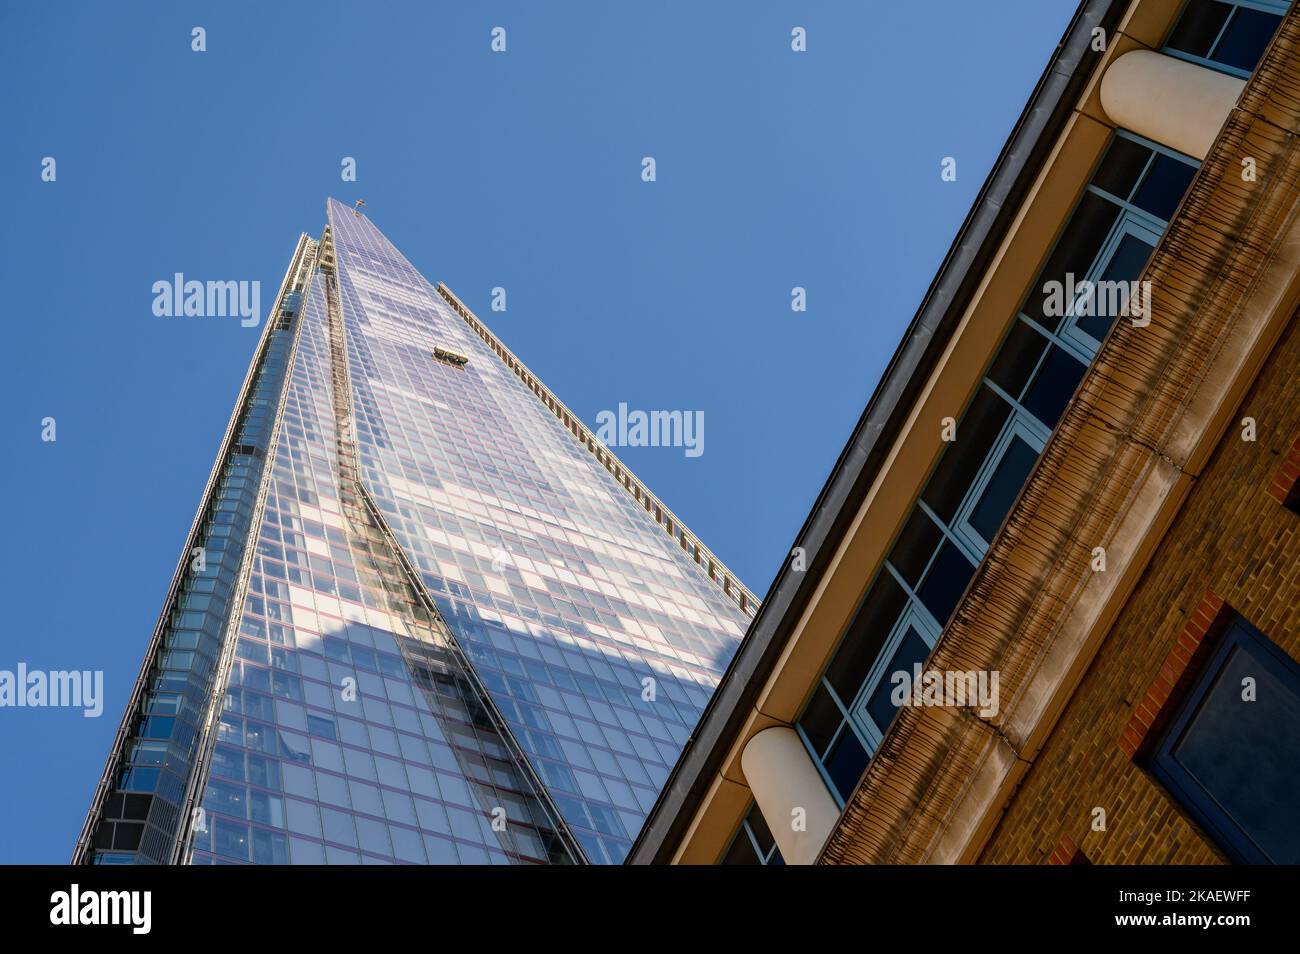 LONDON - November 4, 2020: View up The Shard with the corner of Guys Hospital in the foreground Stock Photo